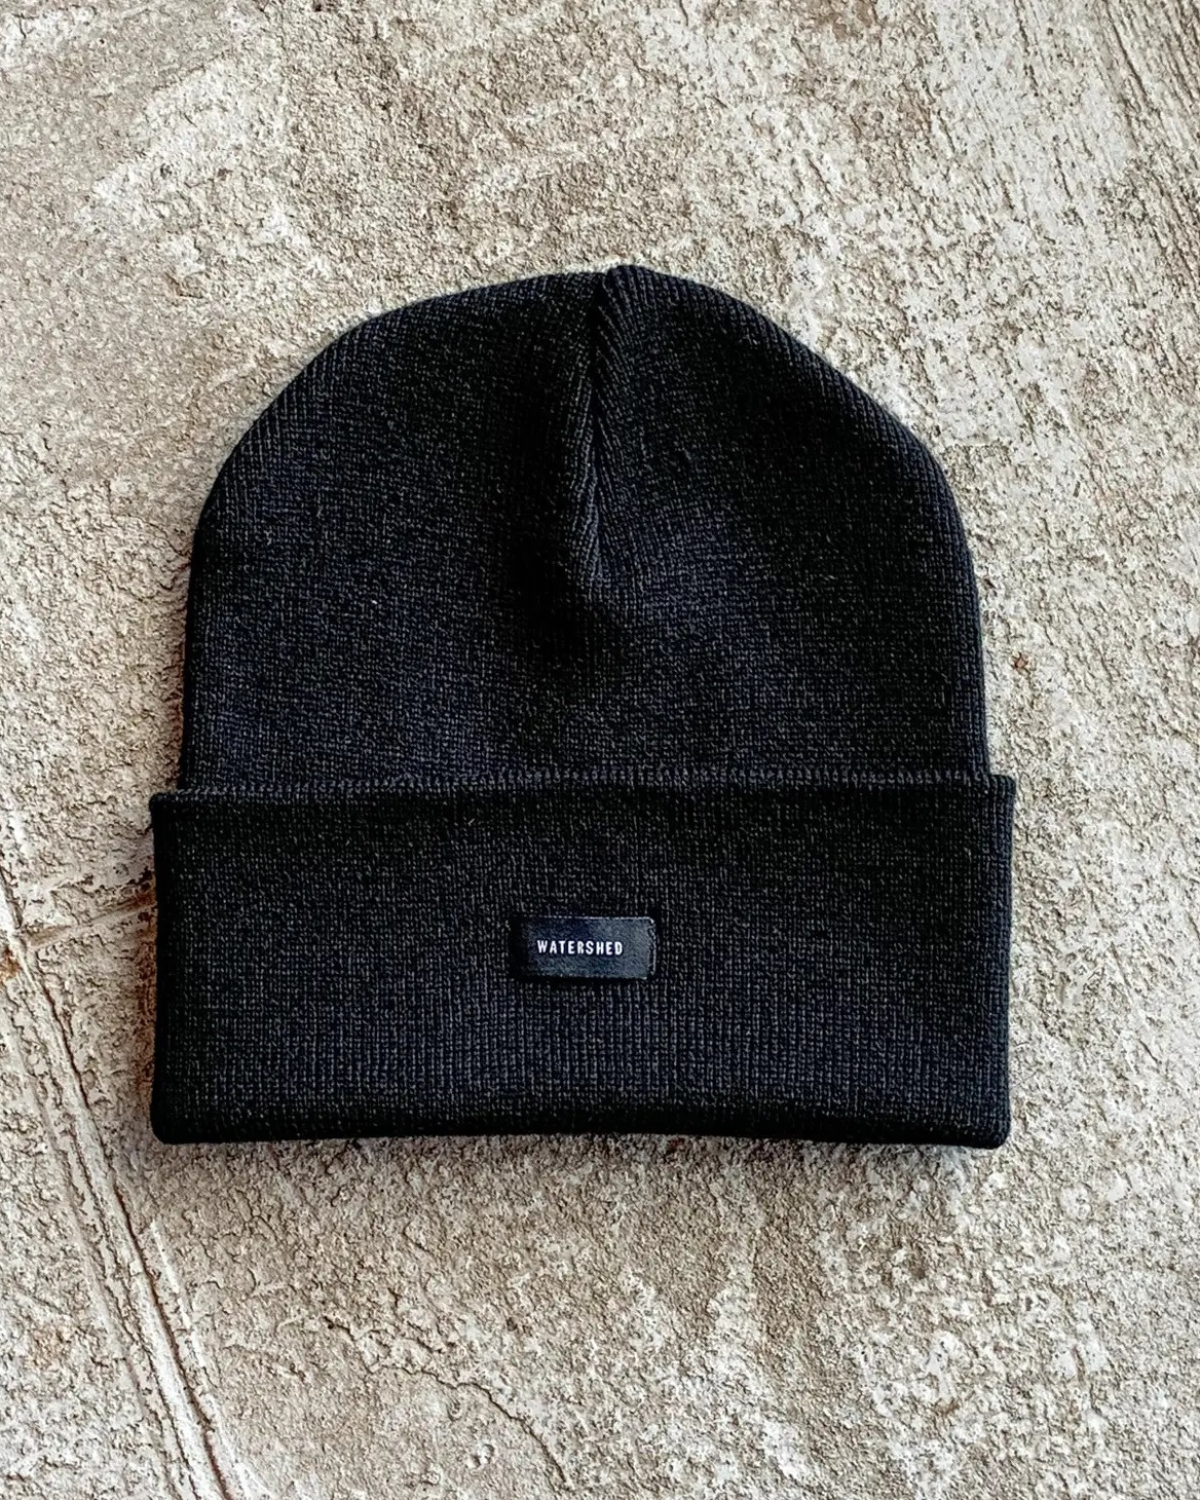 Watershed Issue Beanie - Black